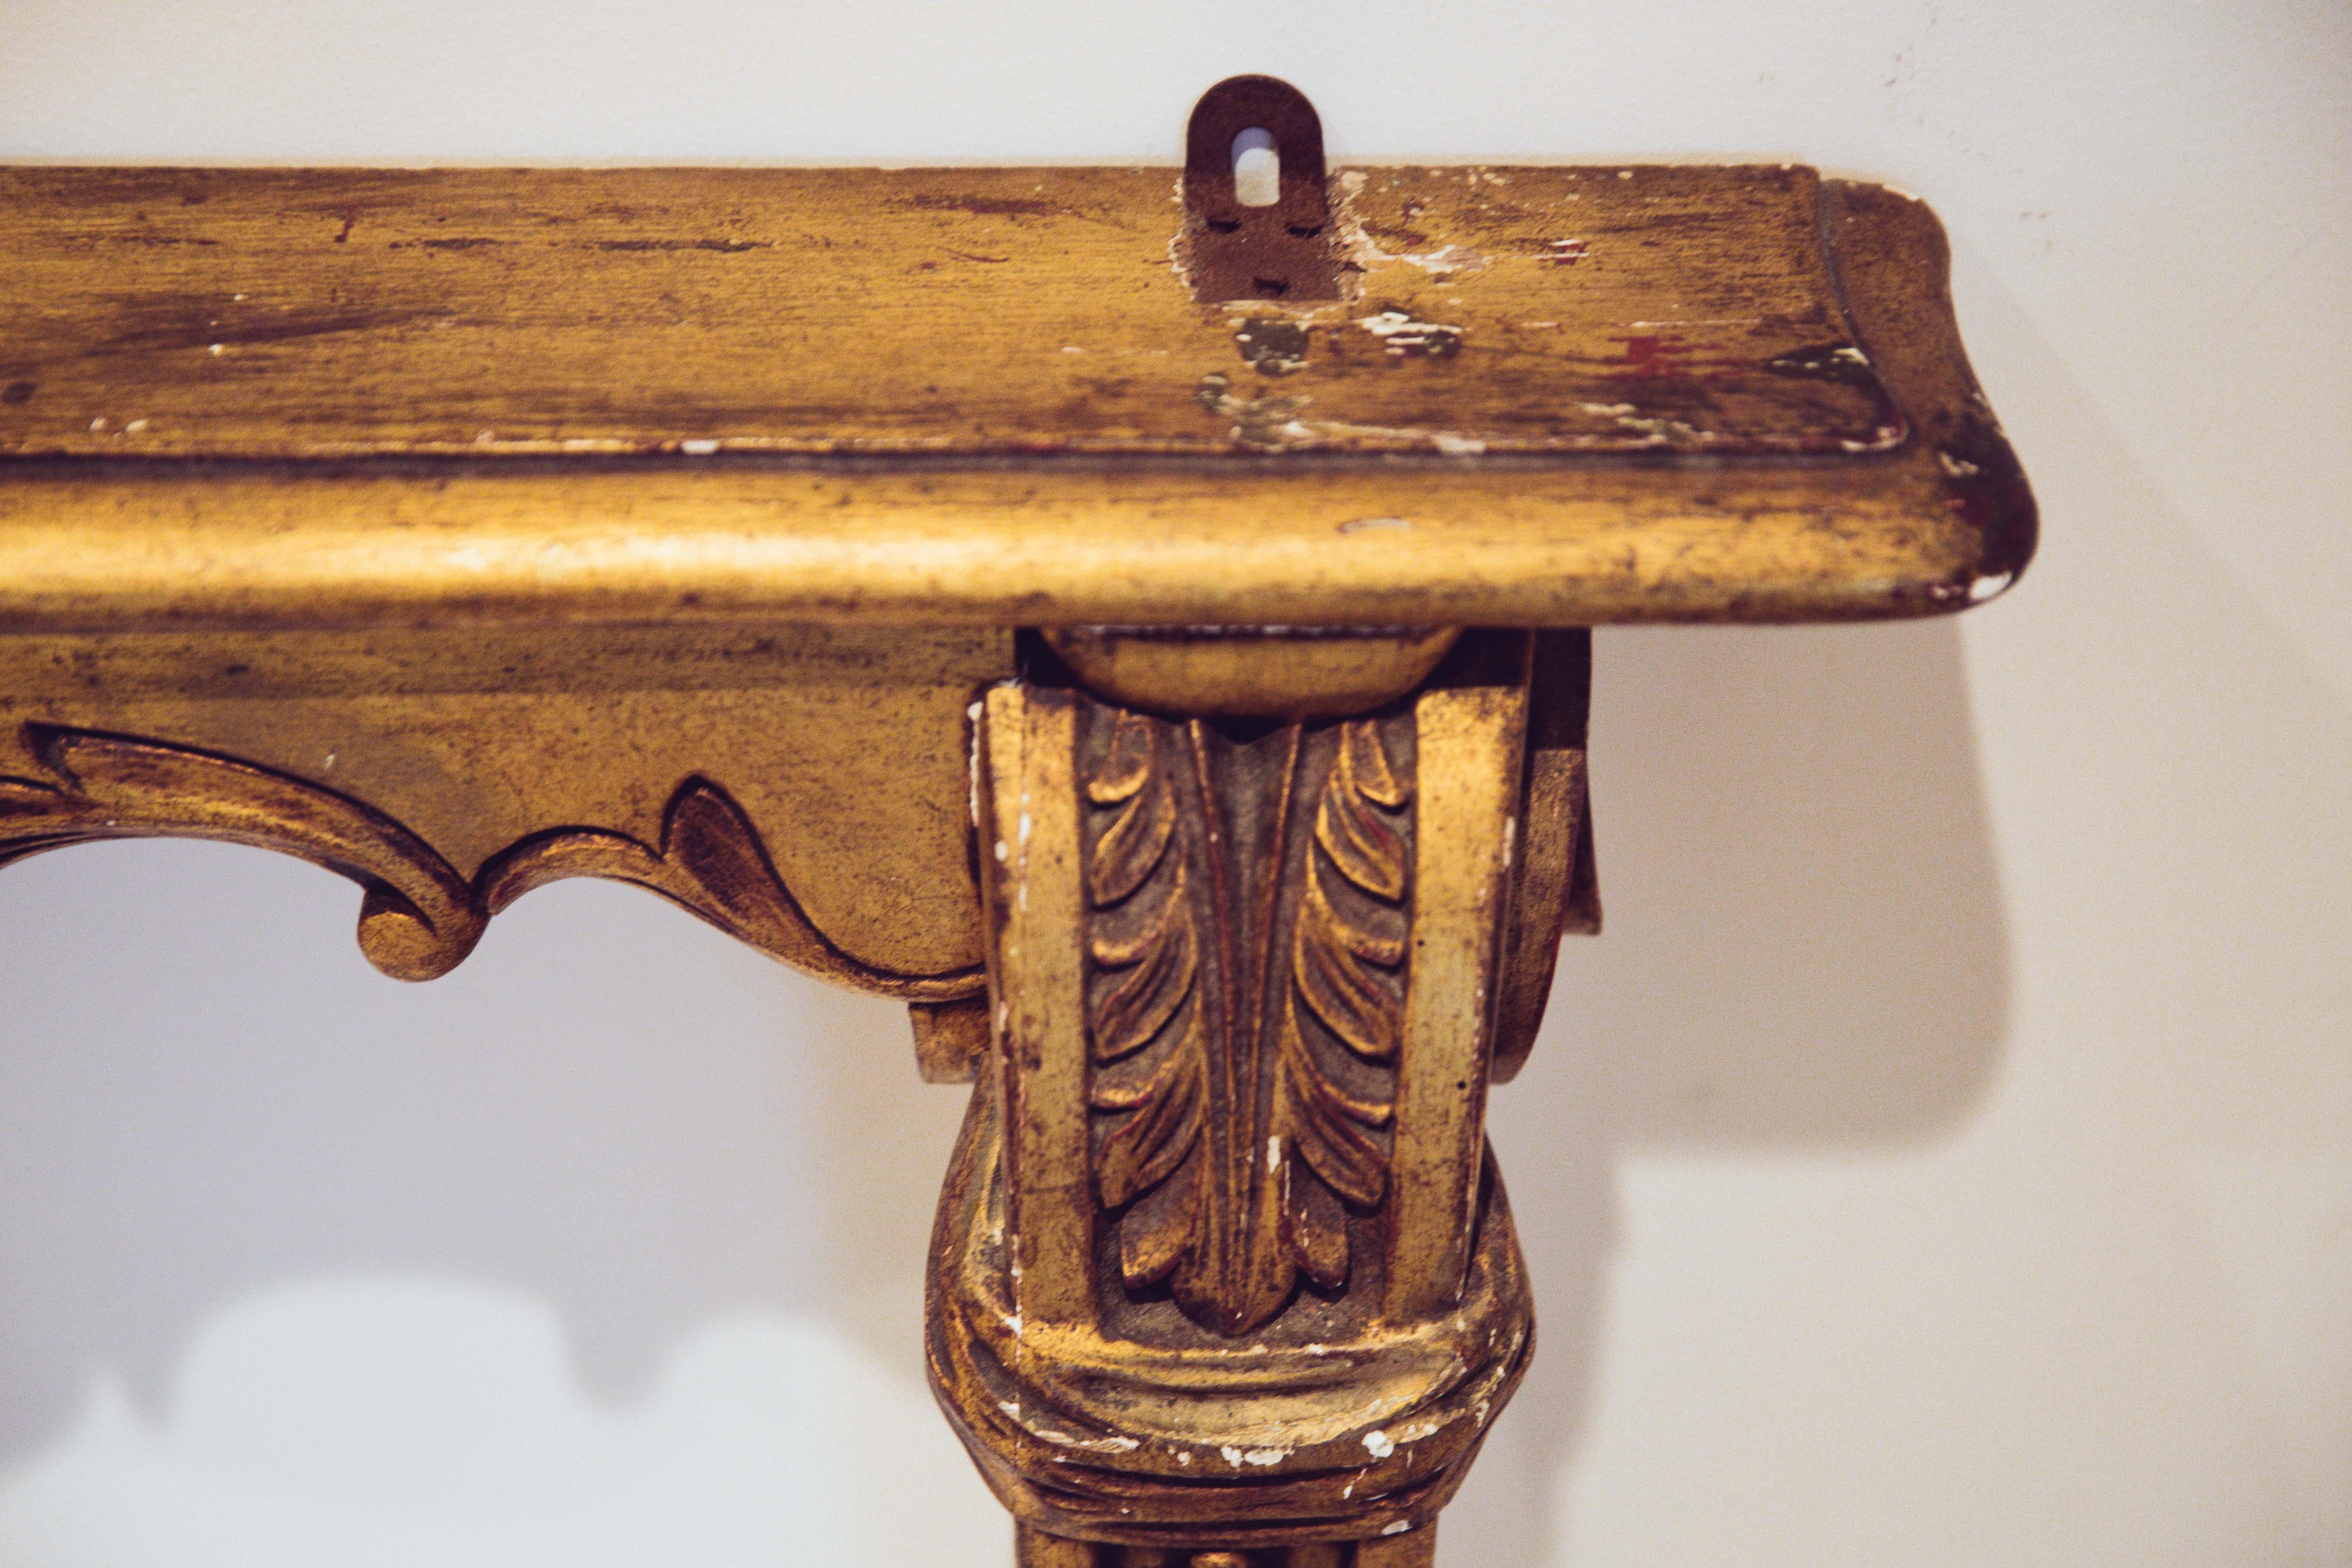 A 19th century small French Louis XVI style hand carved and gilt wooden, rose flowers, cartouche centered console table from the late 19th century.
The ensemble is raised on two angled tapering legs, accented with acanthus leaves in their upper